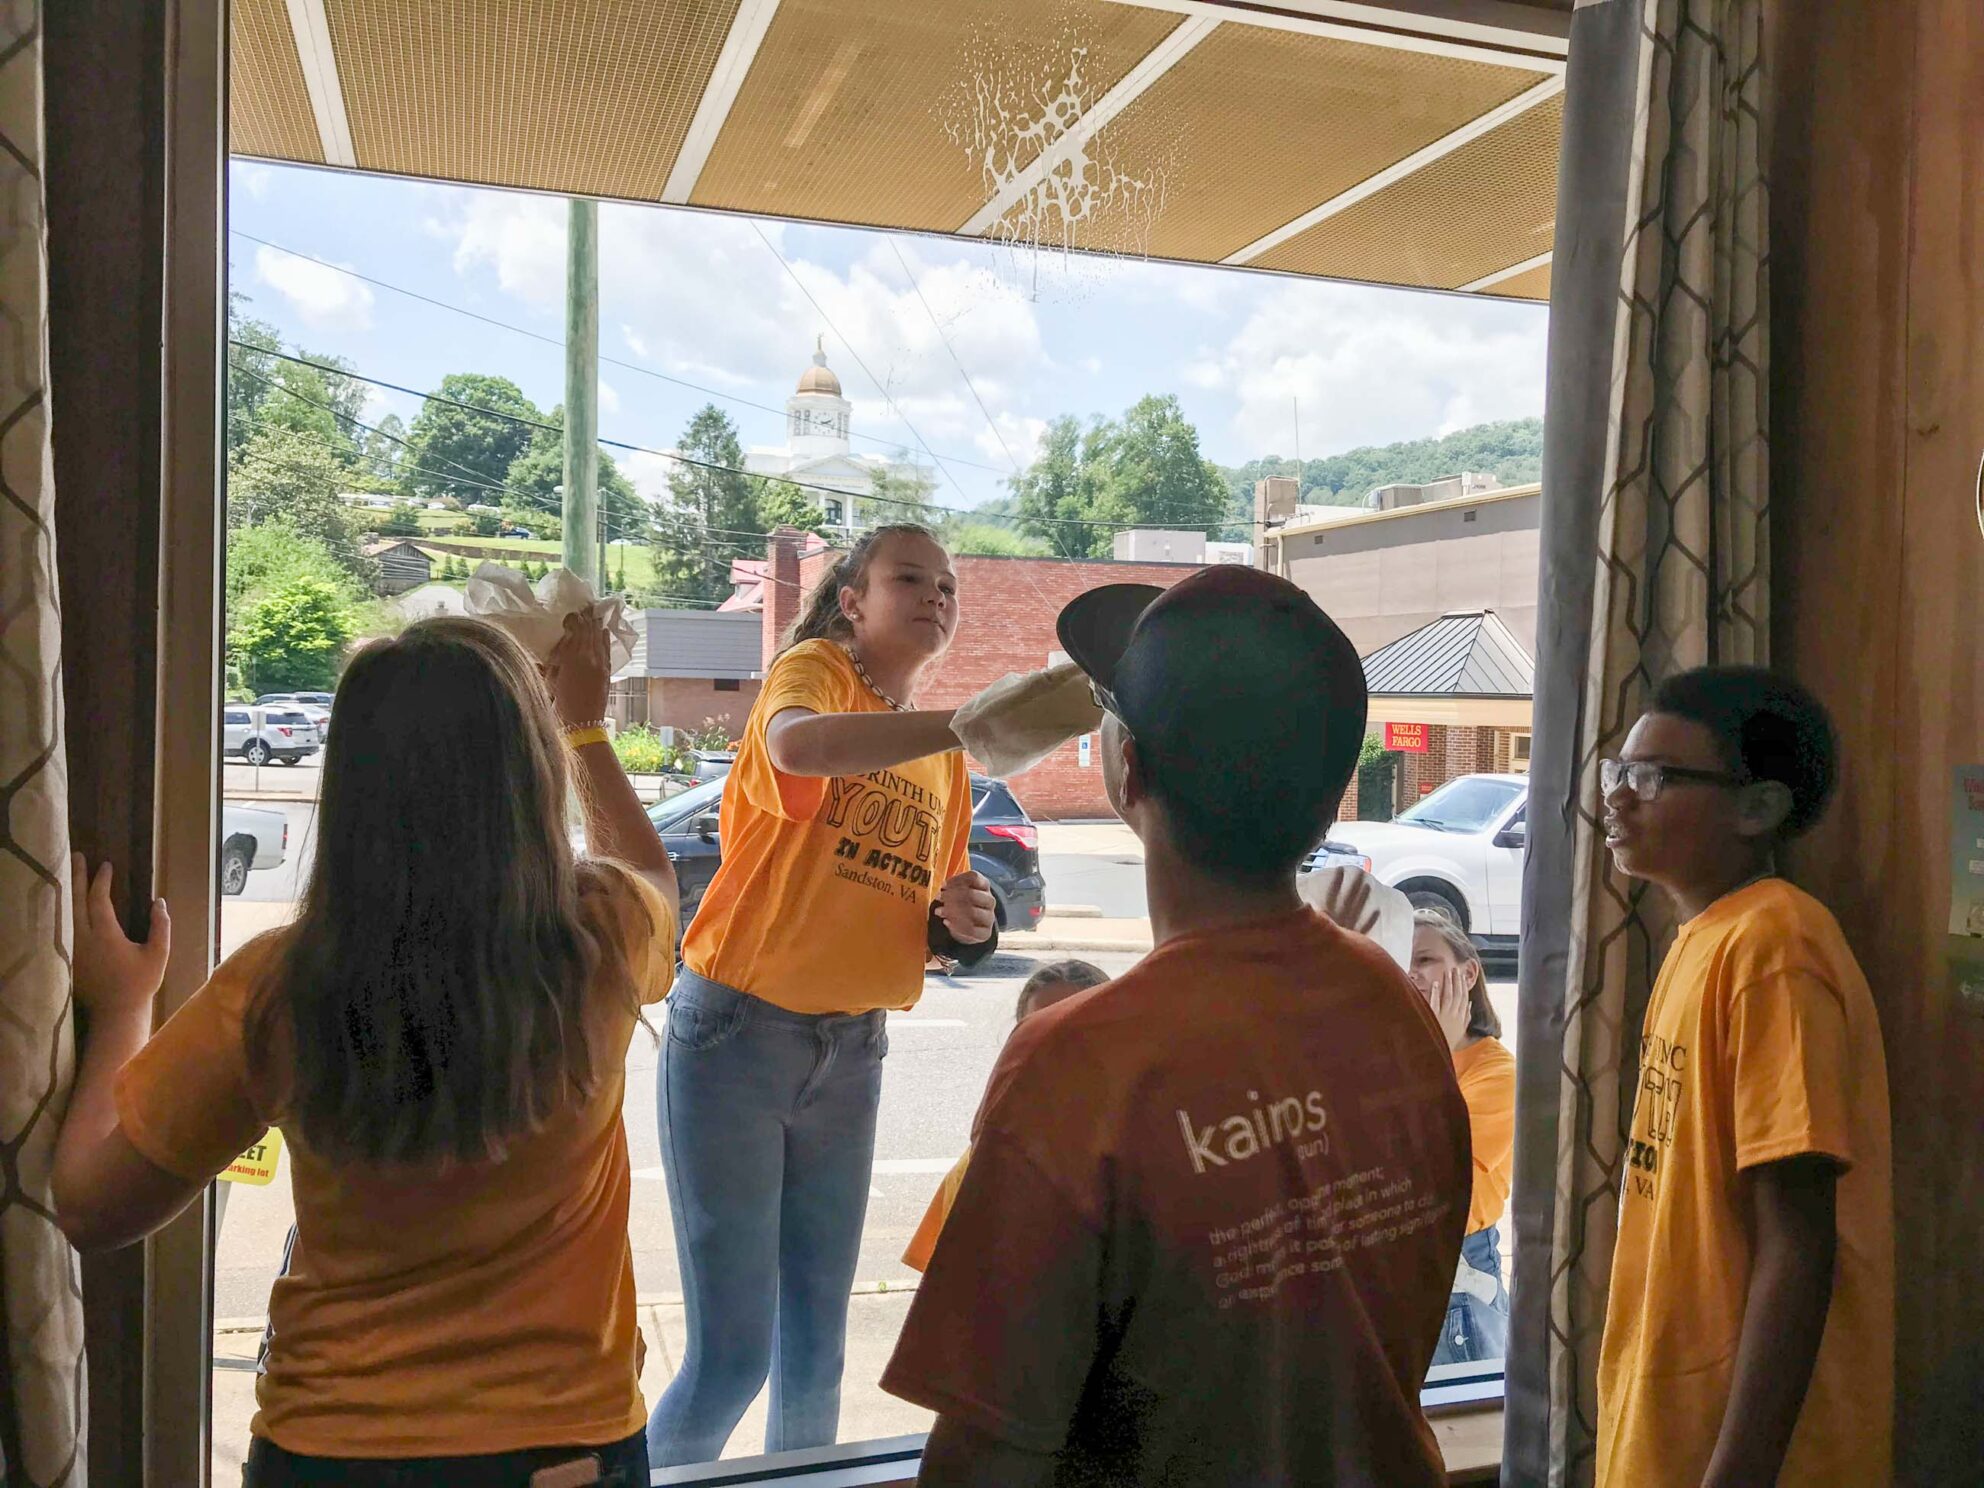 Youth groups take part in service and mission work.